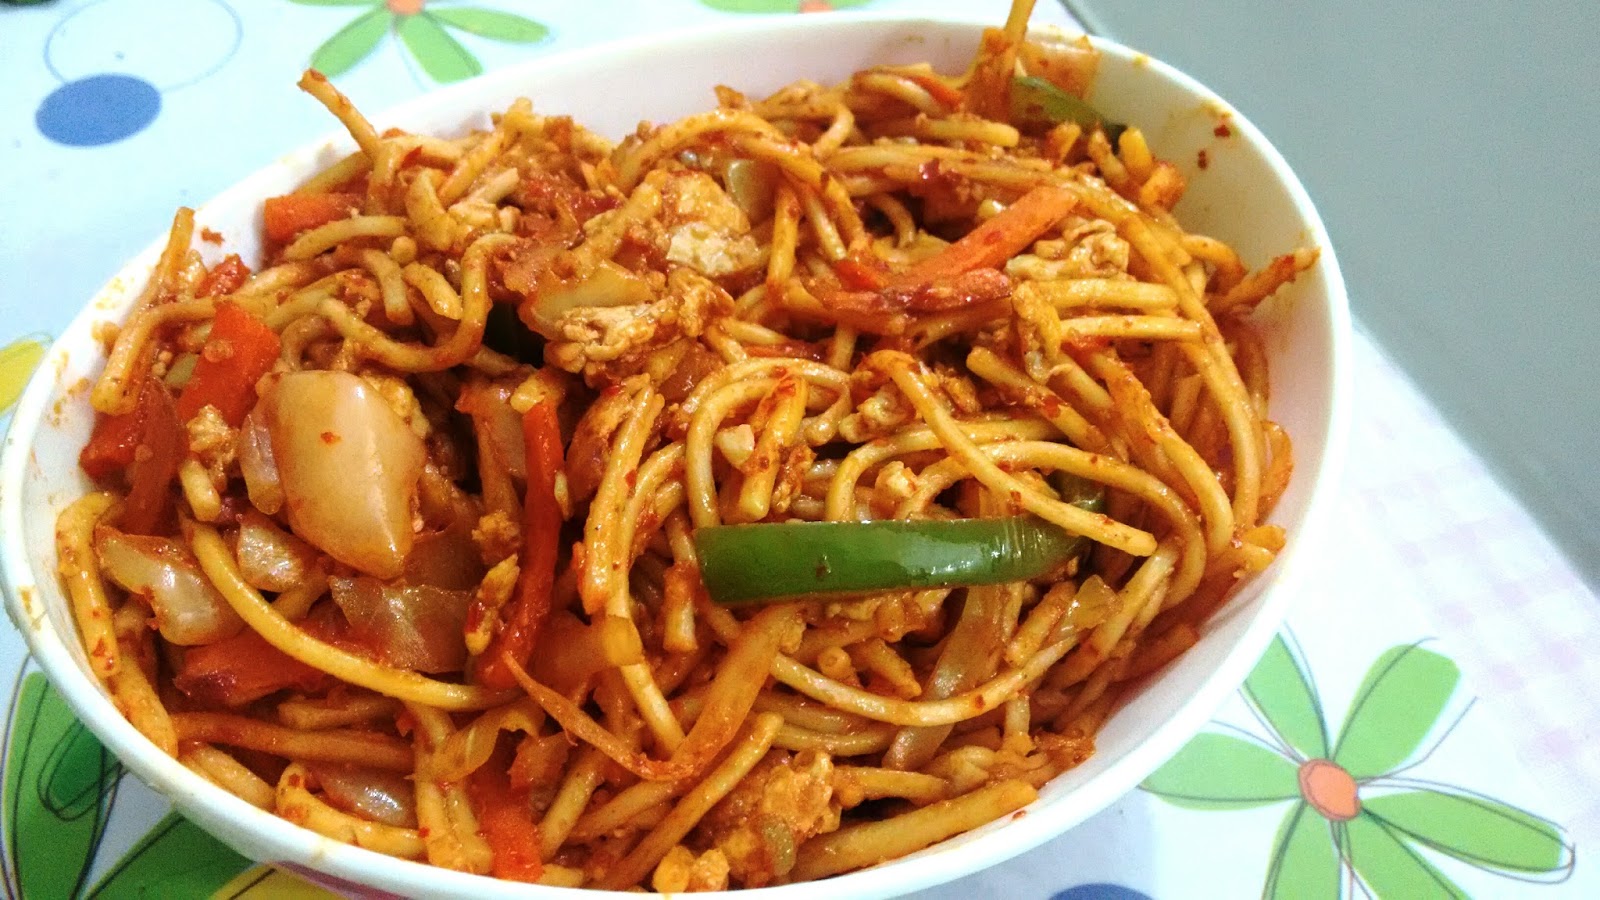 Abhi's Recipes - Variety of Creative & Easy Recipes: Spicy Egg Noodles